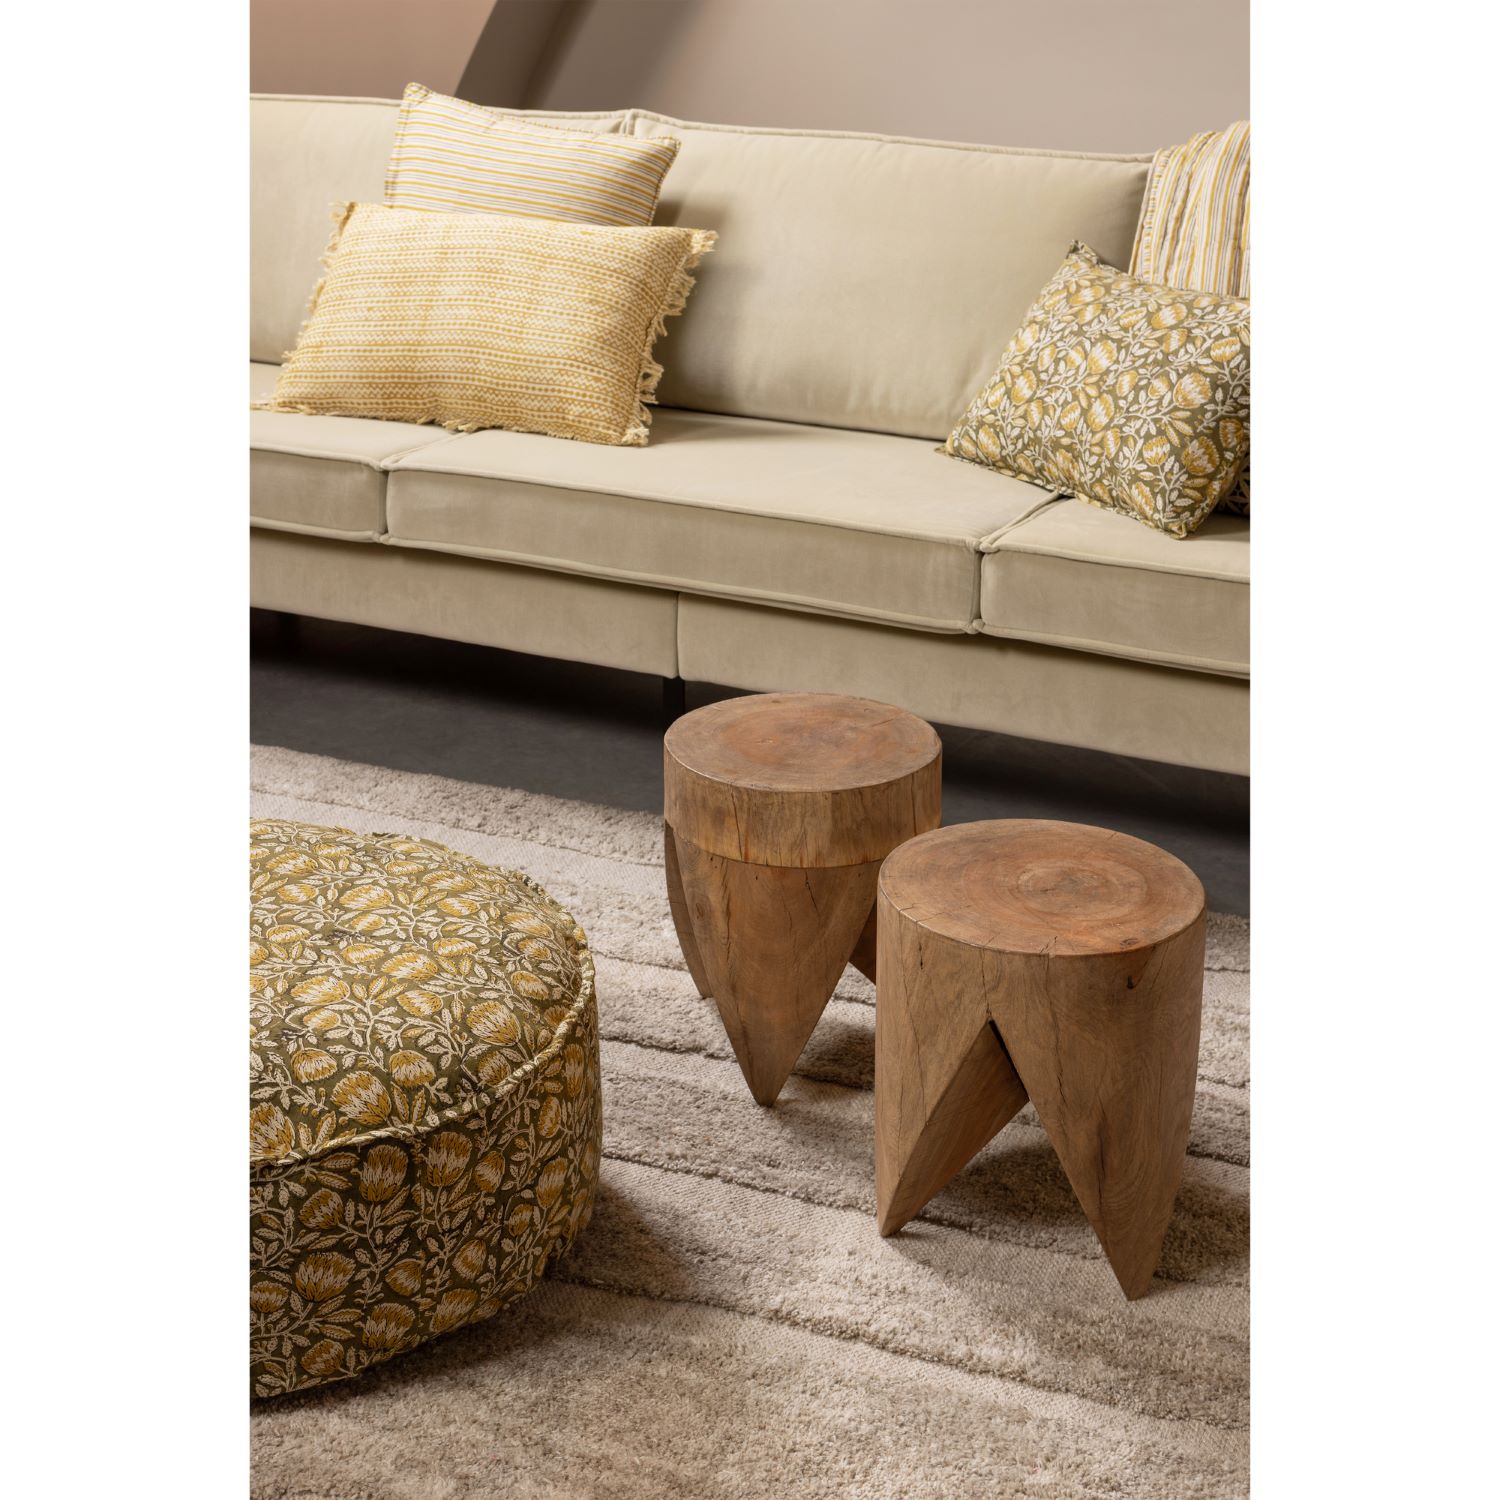 Trunk Removable Side Tables (set of 2)